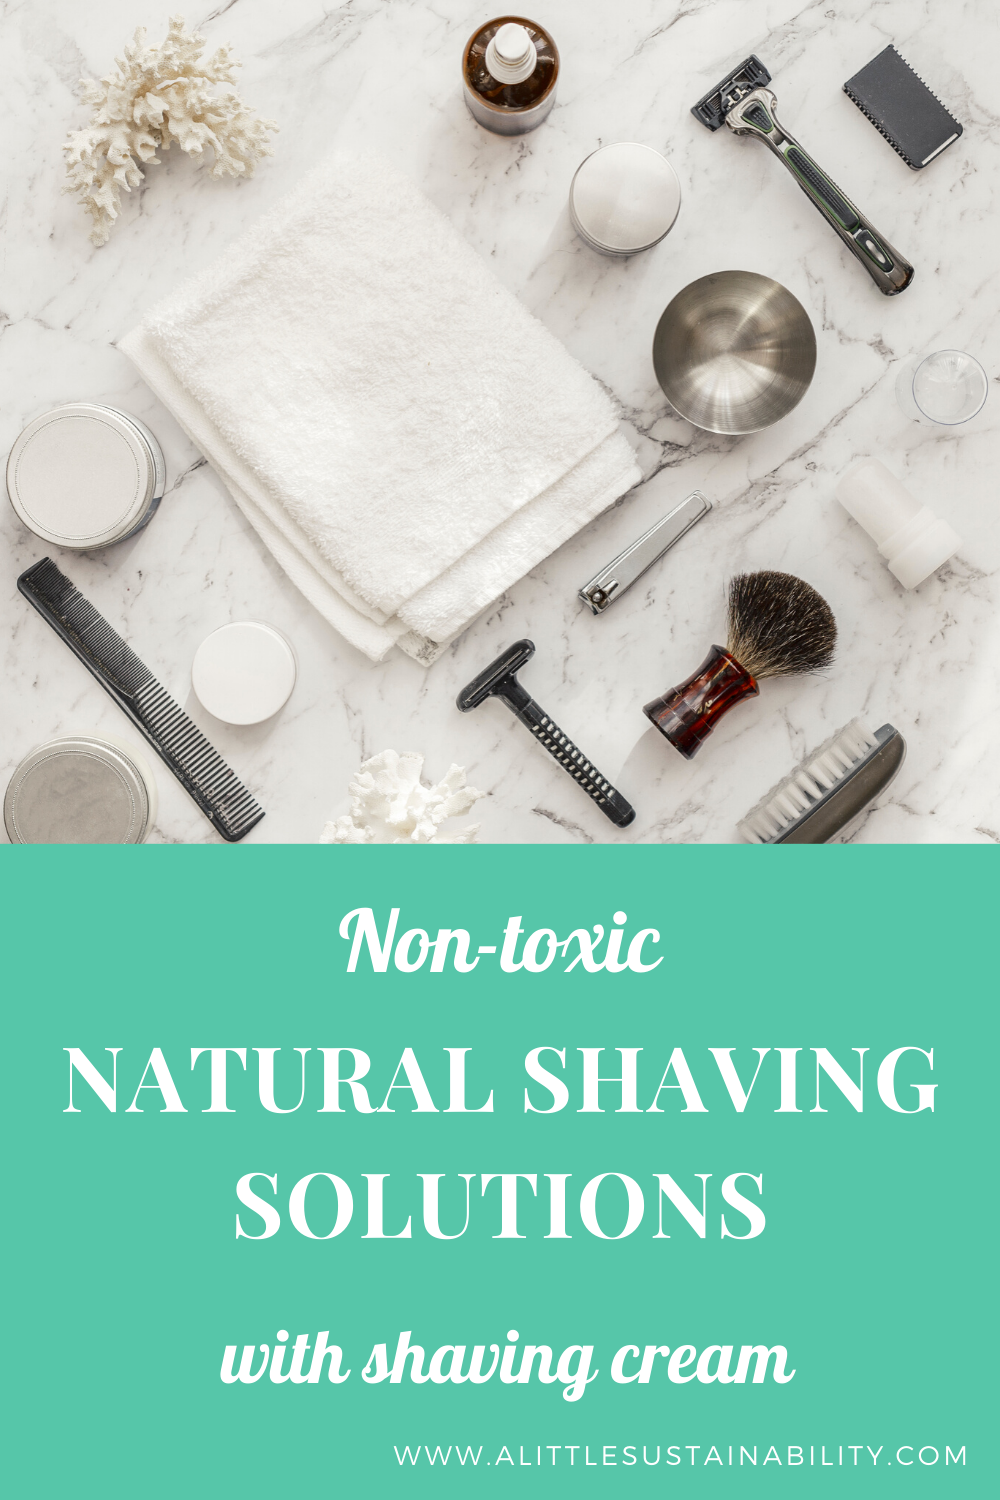 Non toxic living tips with the best non-toxic shaving creams and soaps. These brands are also plastic free and low waste. These 7 brands that are highlighted use natural ingredients and plastic free packaging. Find more ways to be a little more sustainable at www.alittlesustainability.com #plasticfree #natural